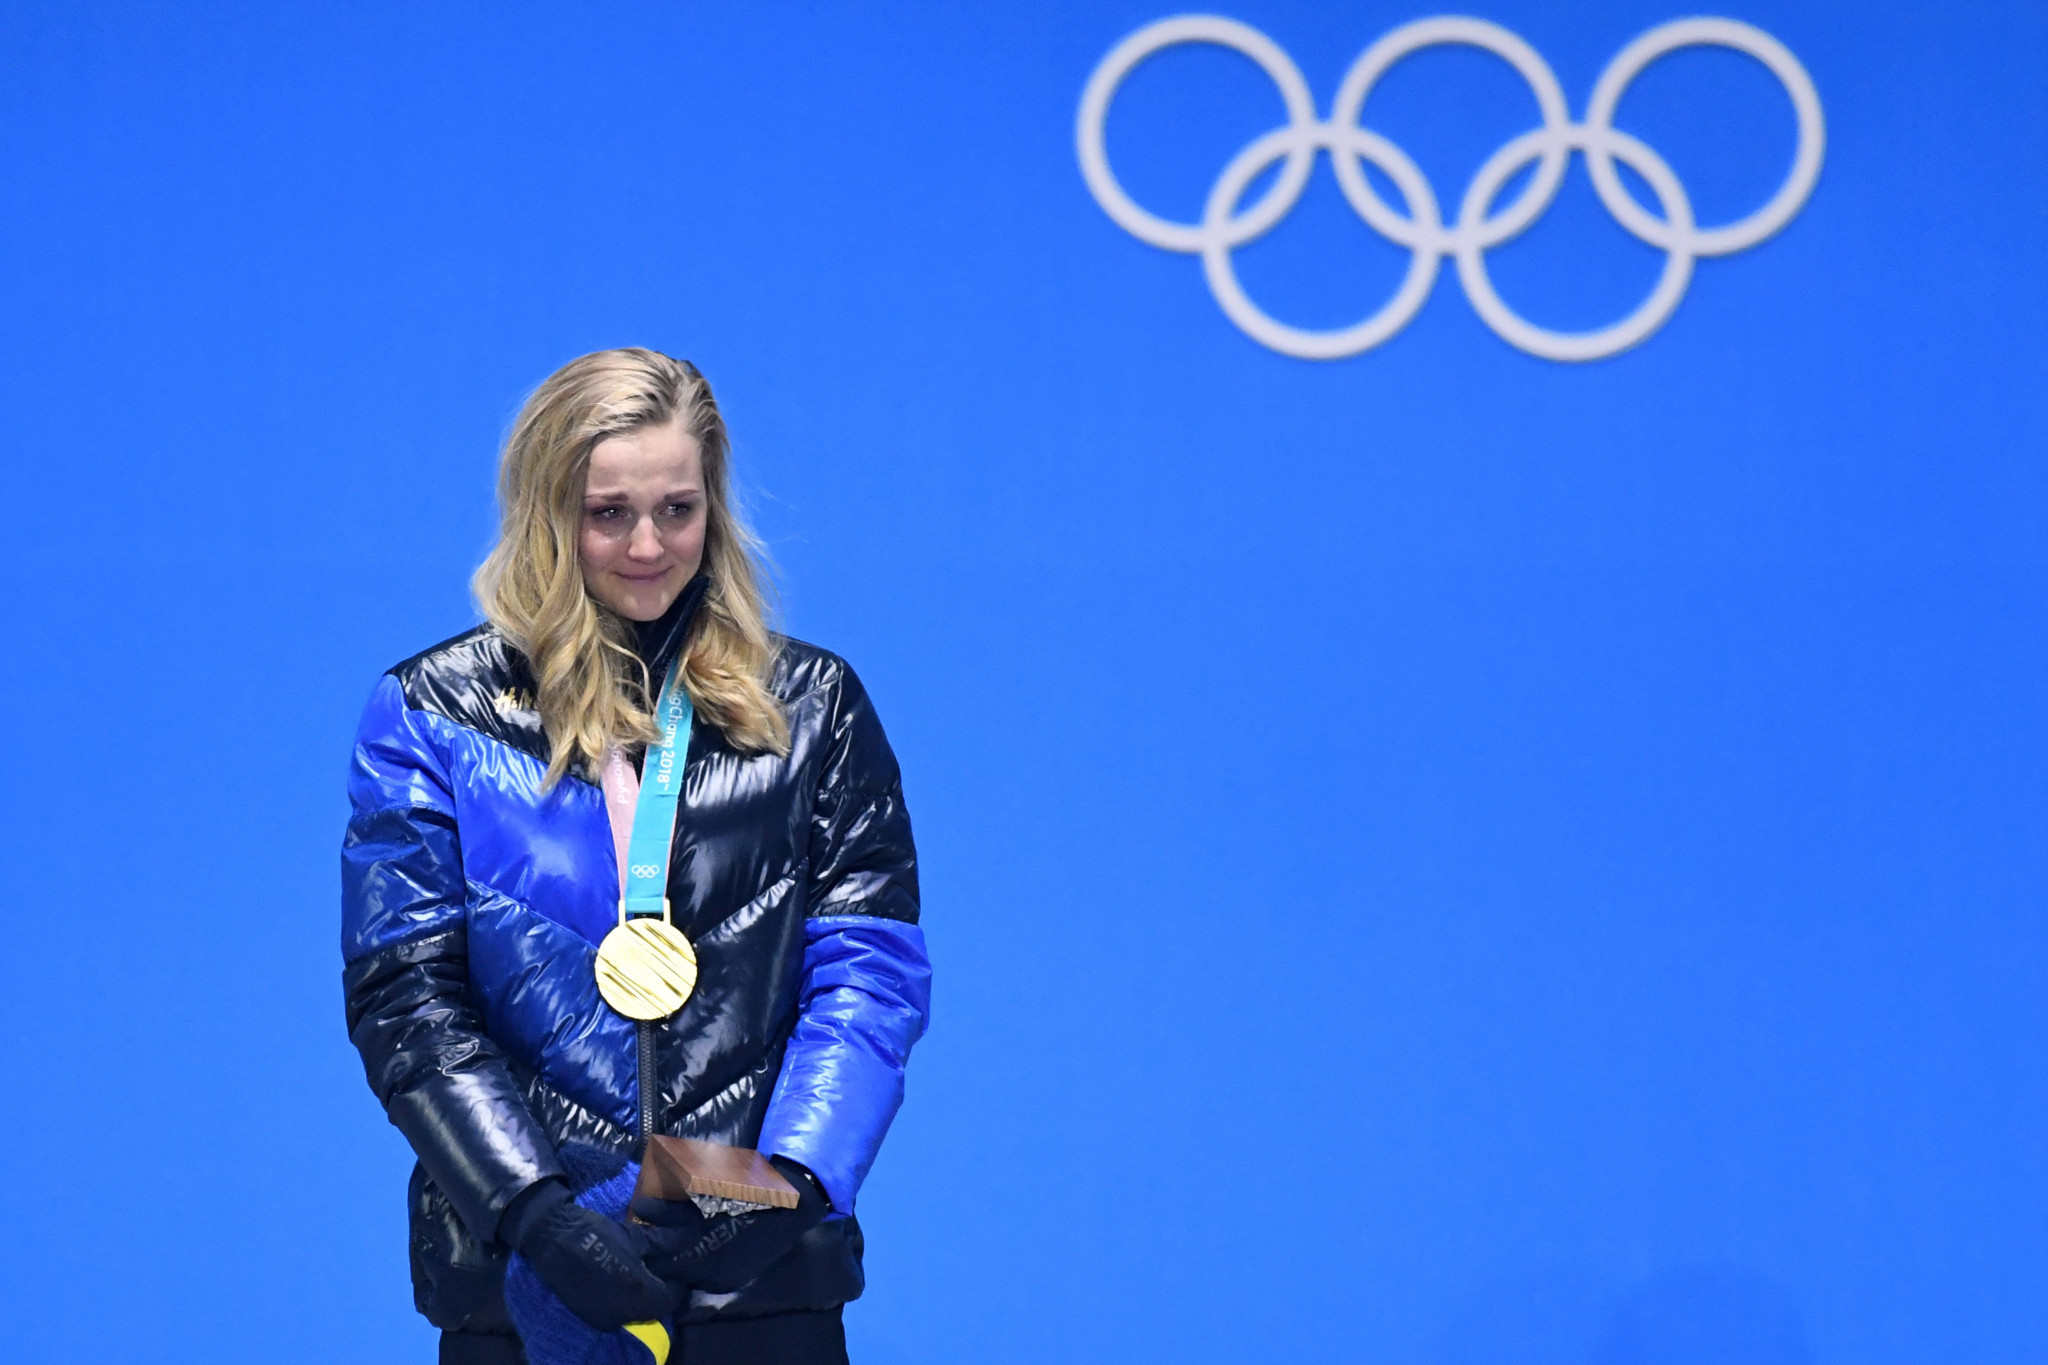 Stina Nilsson has won five Olympic medals in total ©Getty Images